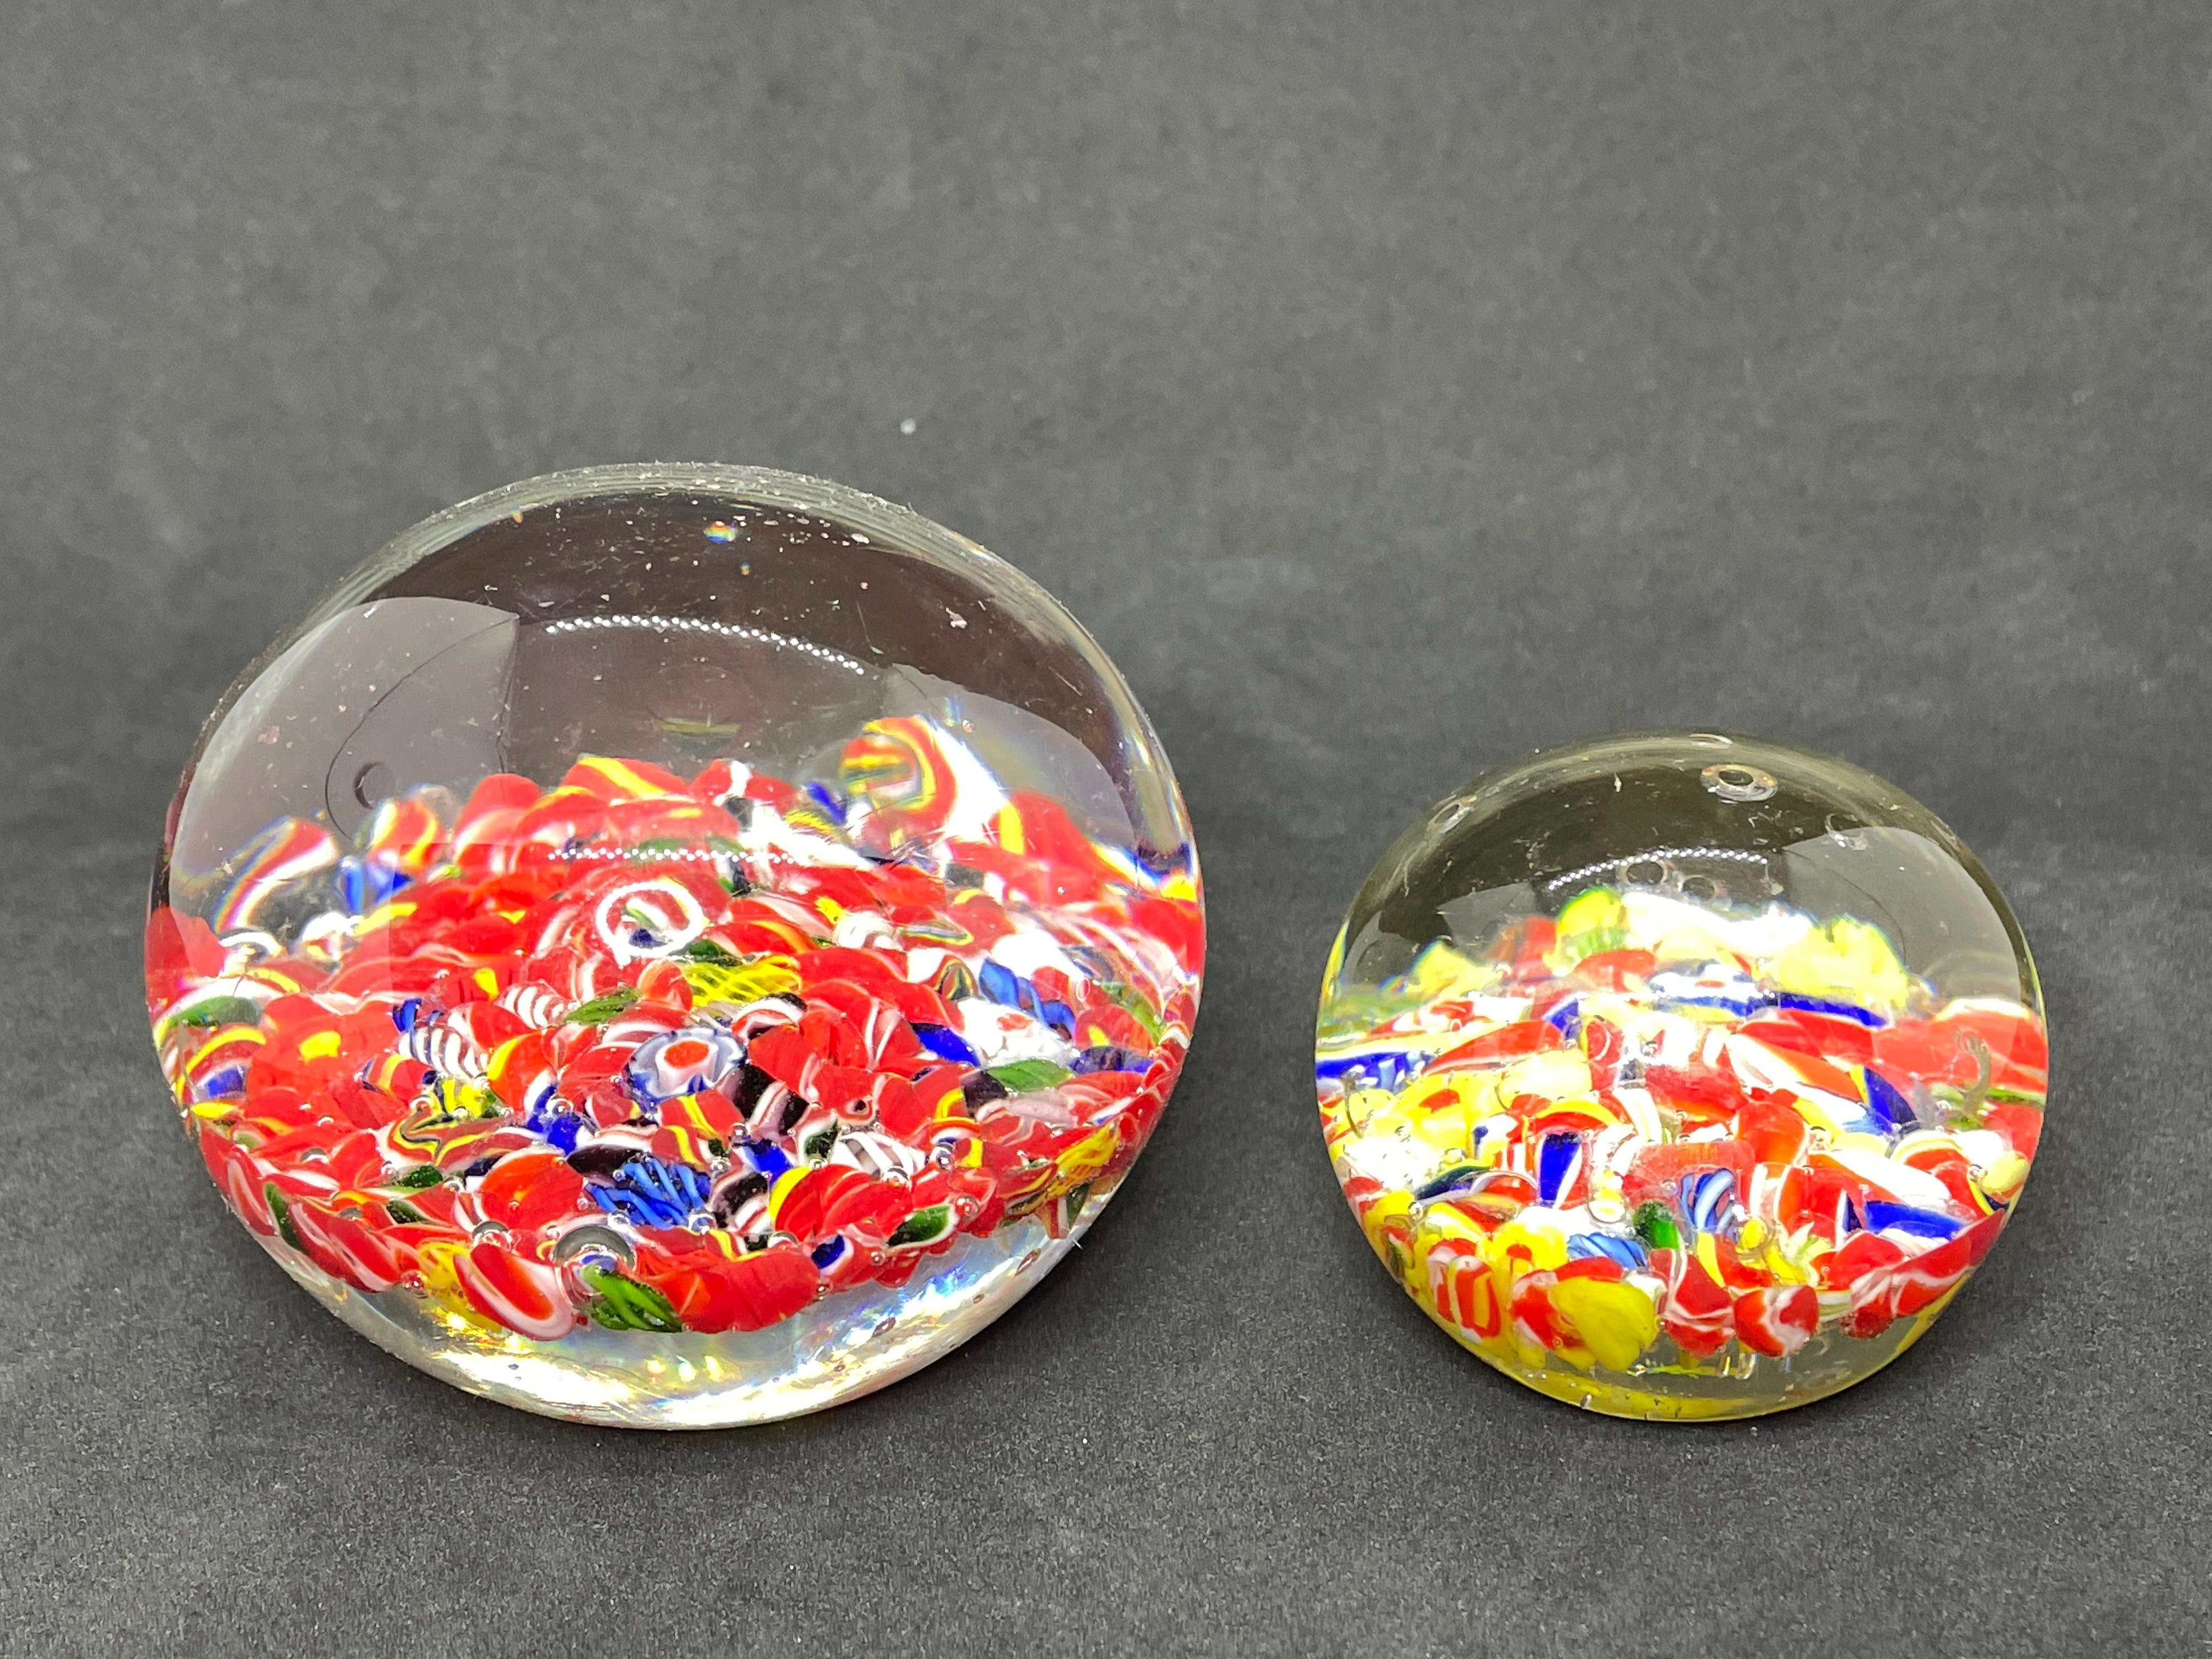 A set of two beautiful Murano hand blown Italian art glass paper weight. Showing some flowers. Colors are a blue, white, red and clear. A beautiful nice addition to your desktop or as a decorative piece in every room.